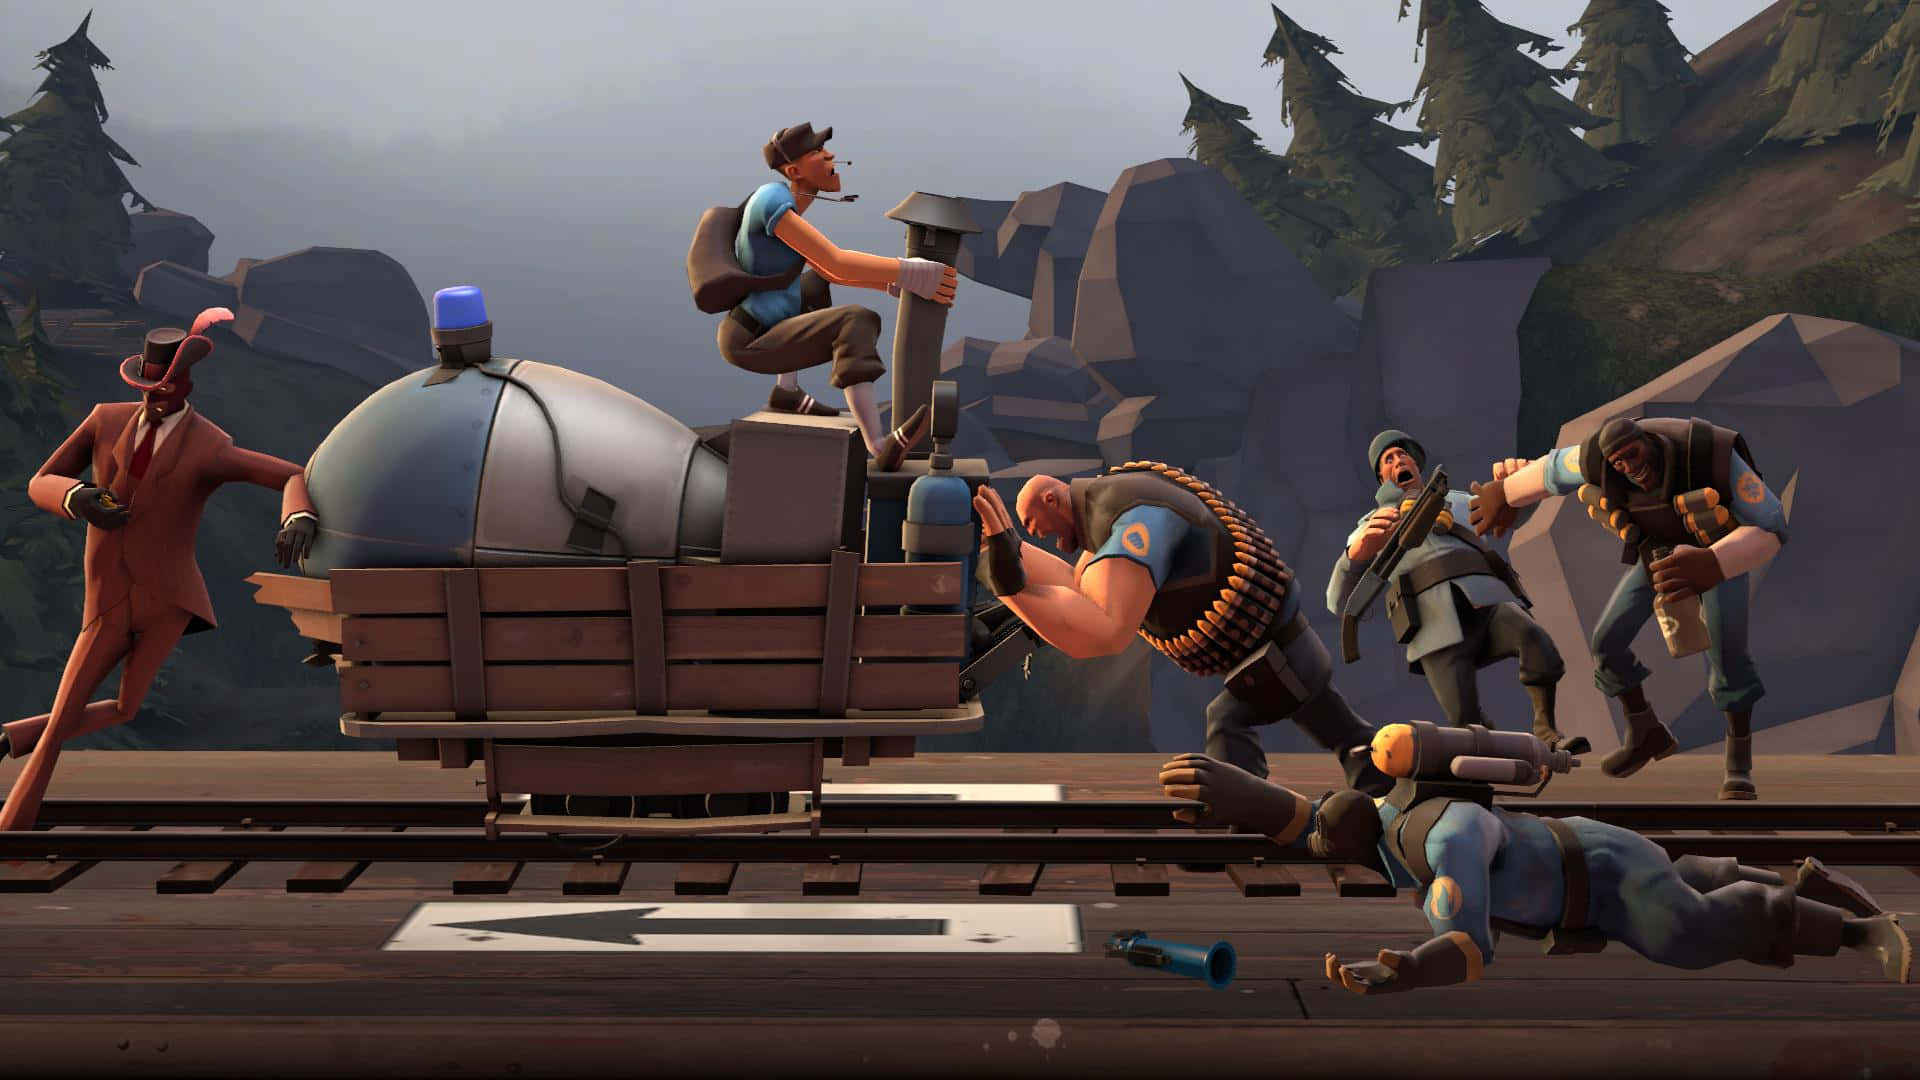 Take to the Skies - Team Fortress 2